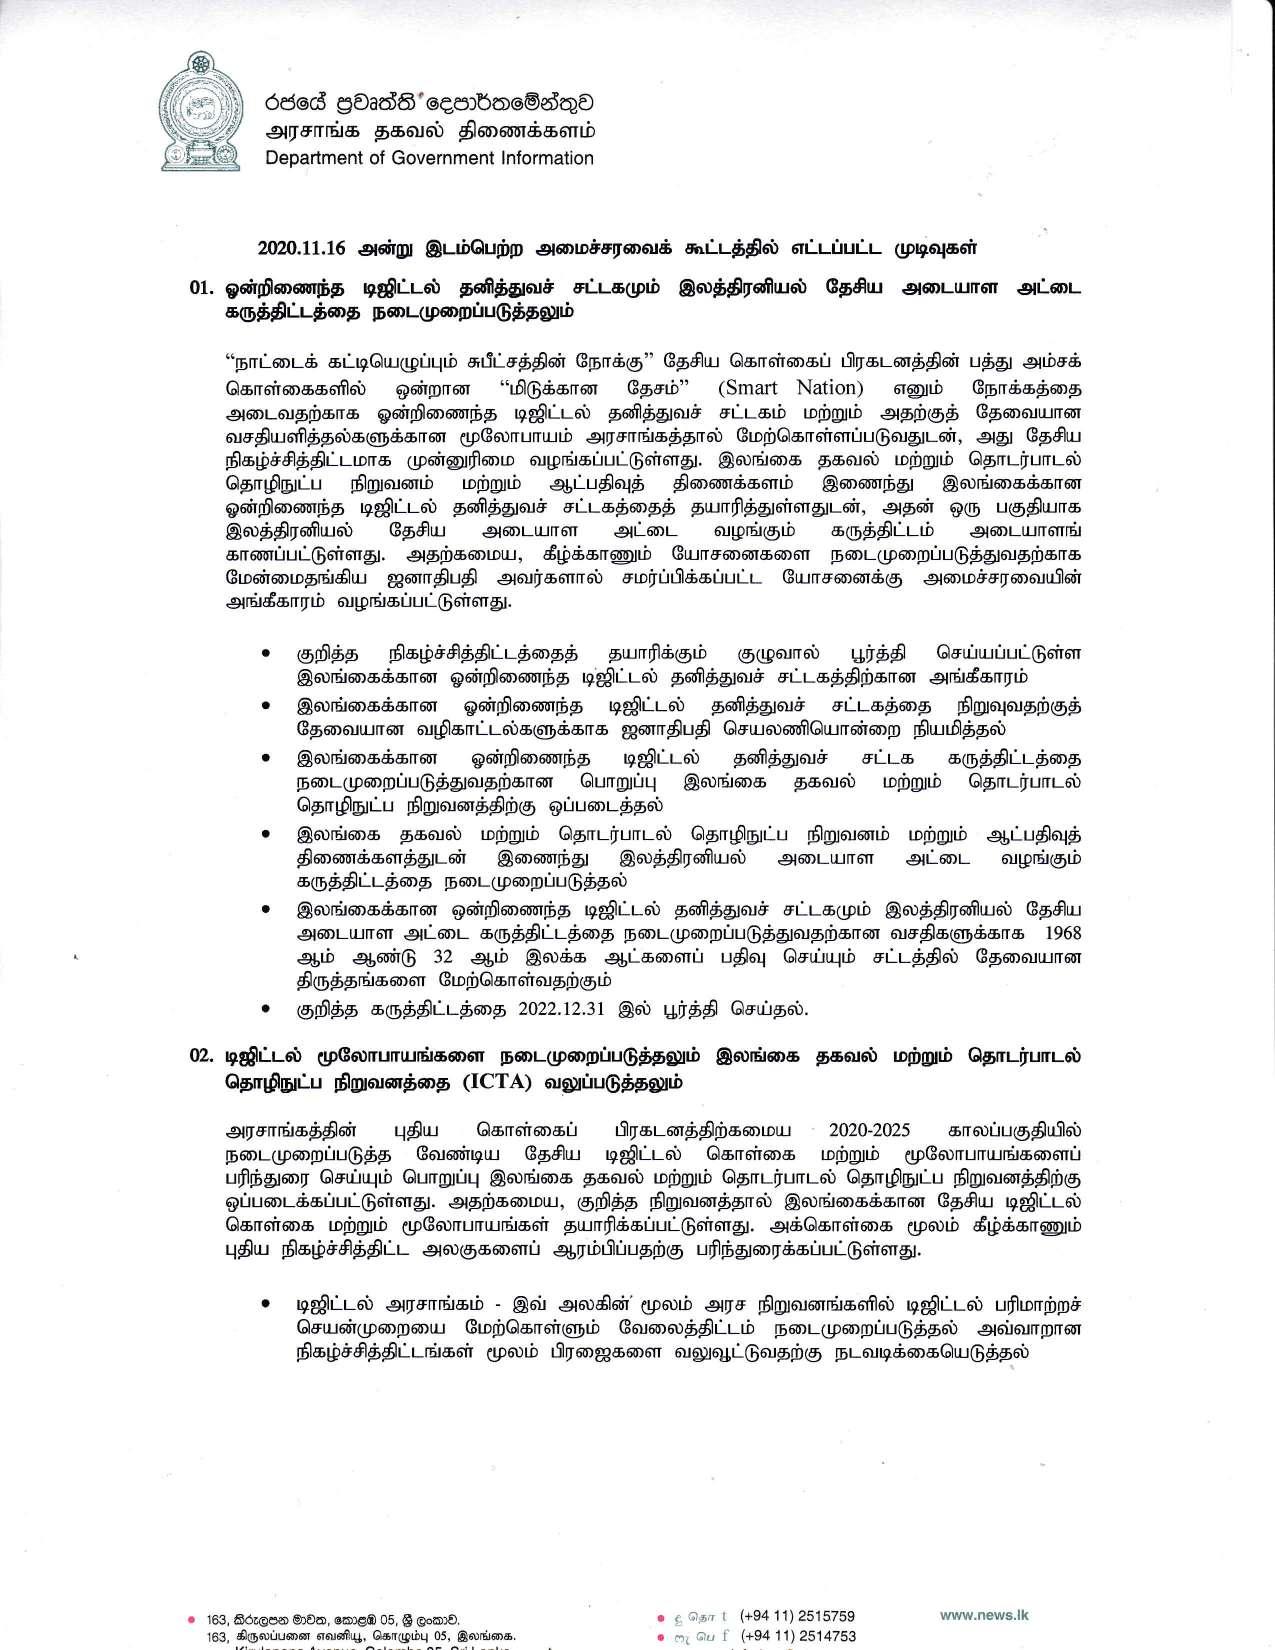 Cabinet Desion on 16.11.2020 Tamil page 001